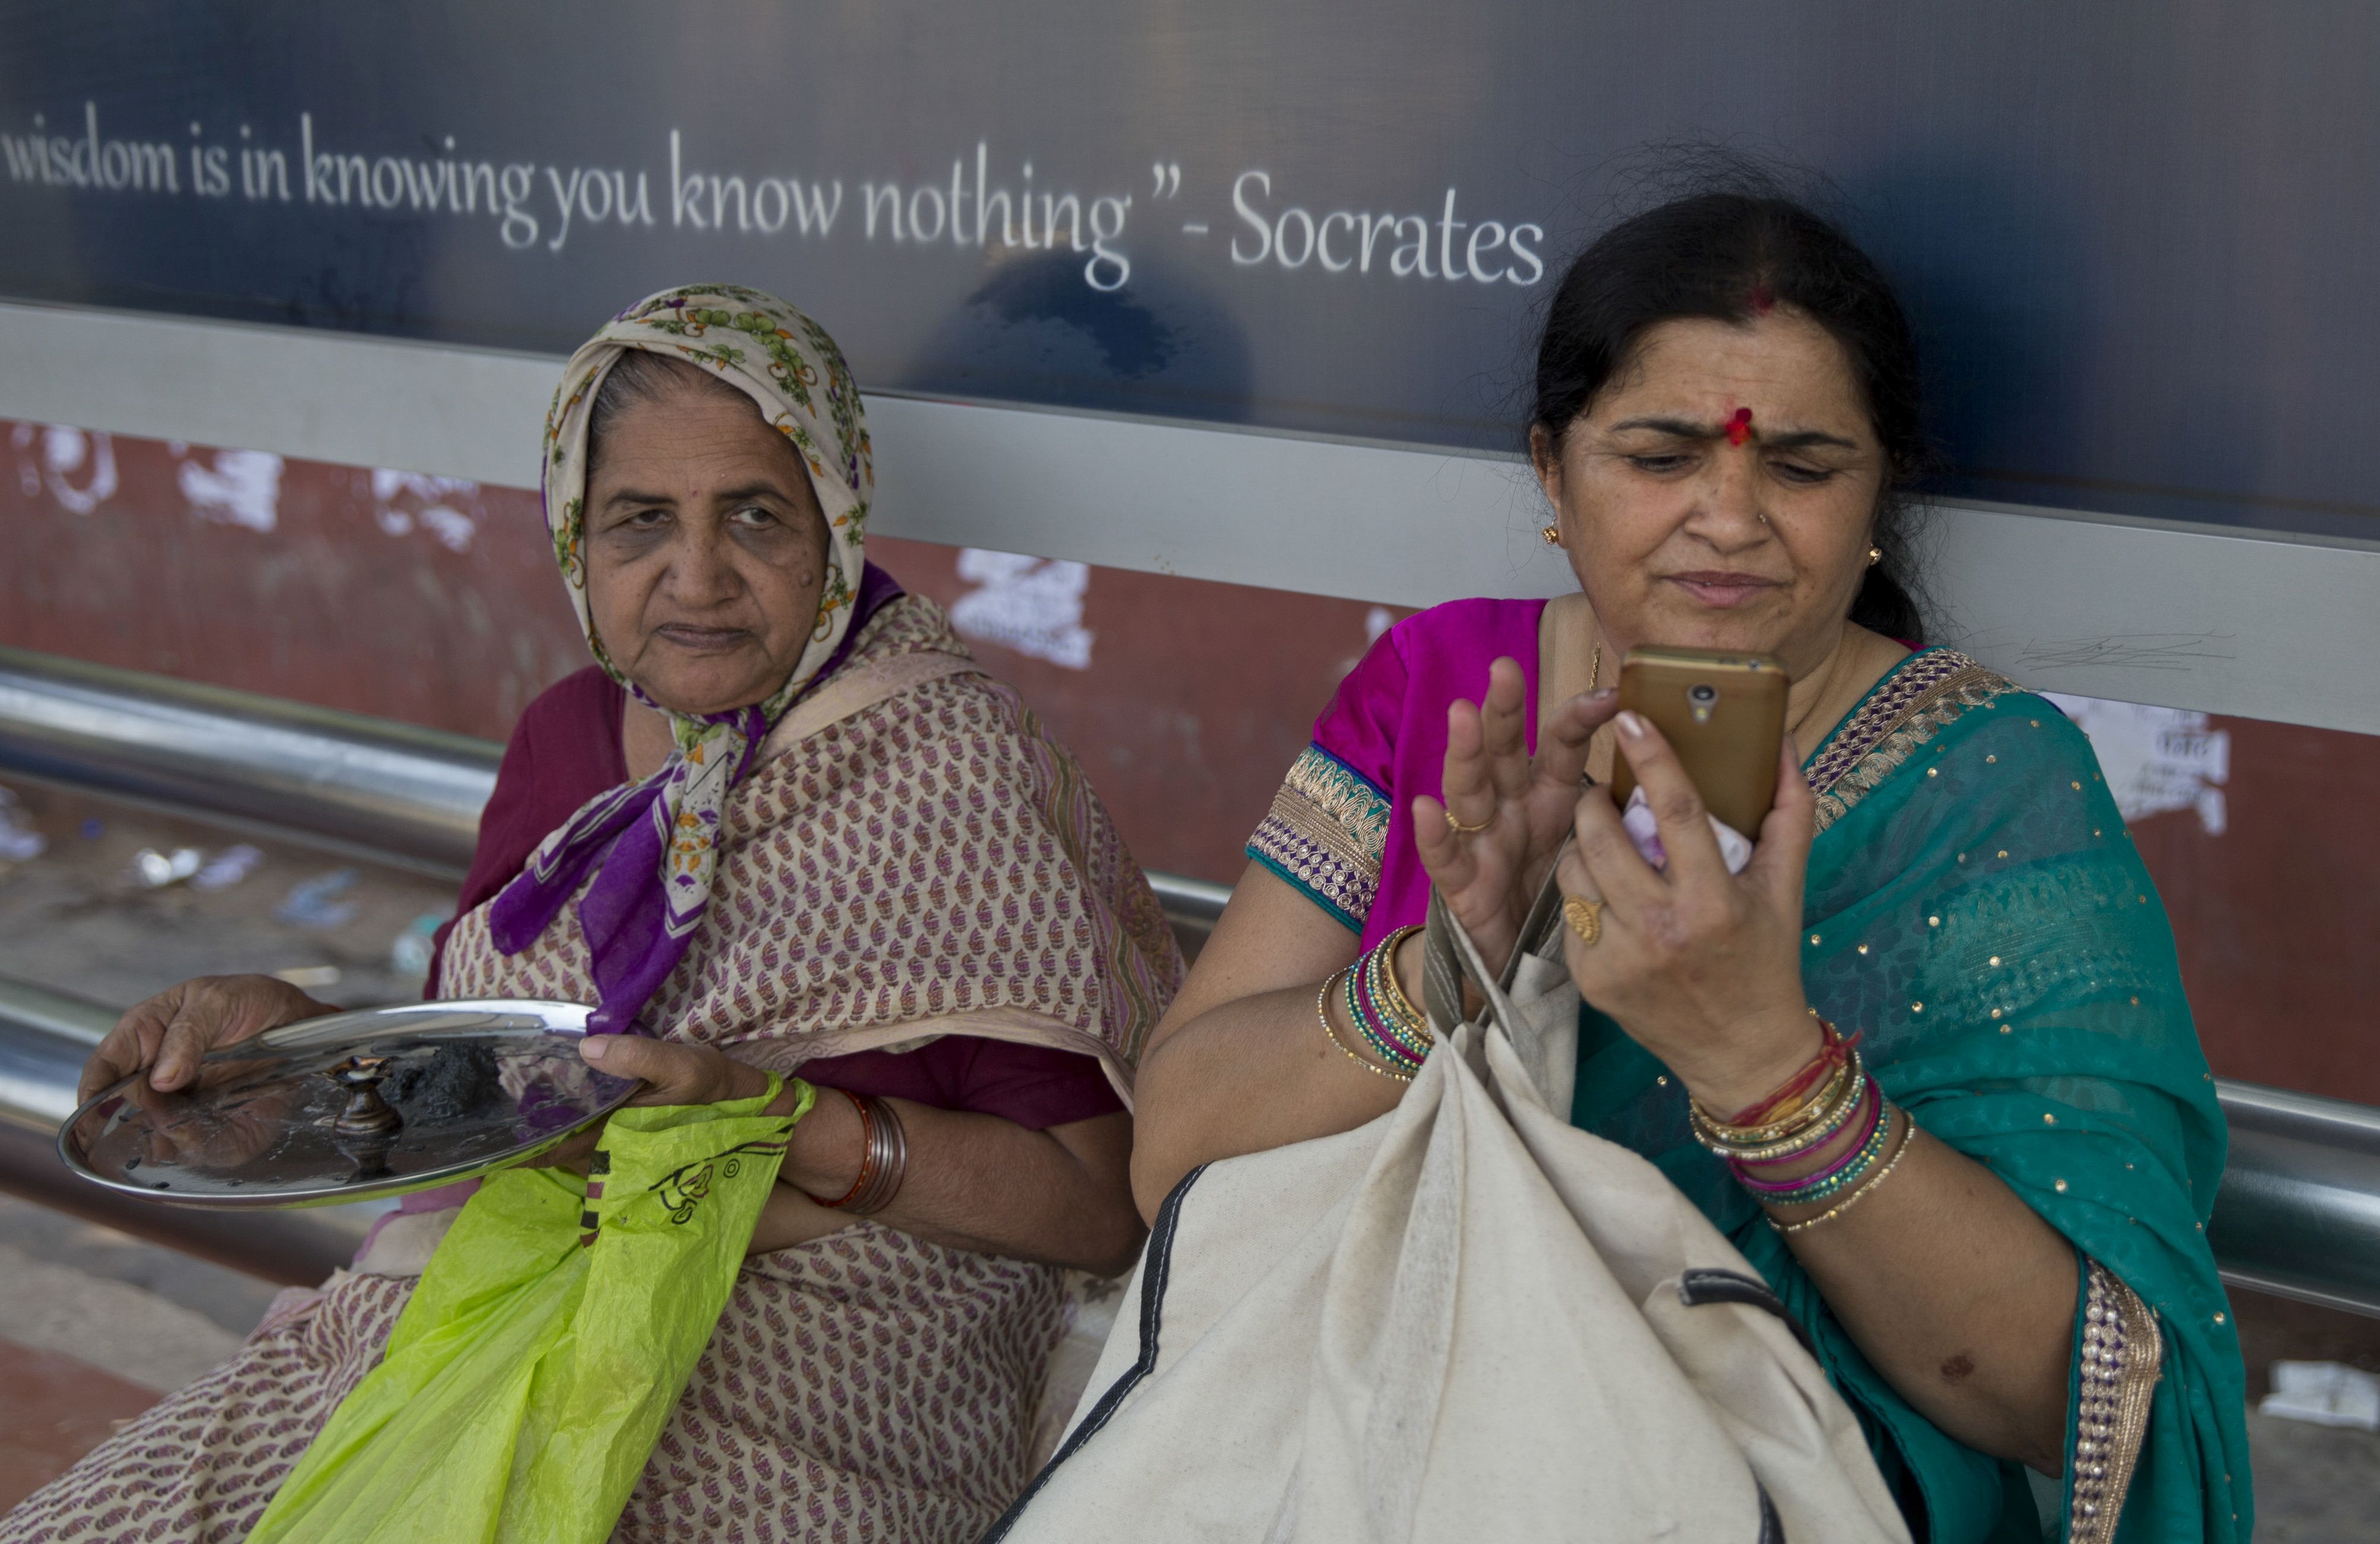 An Indian woman uses her mobile phone as she waits for a bus in New Delhi, India